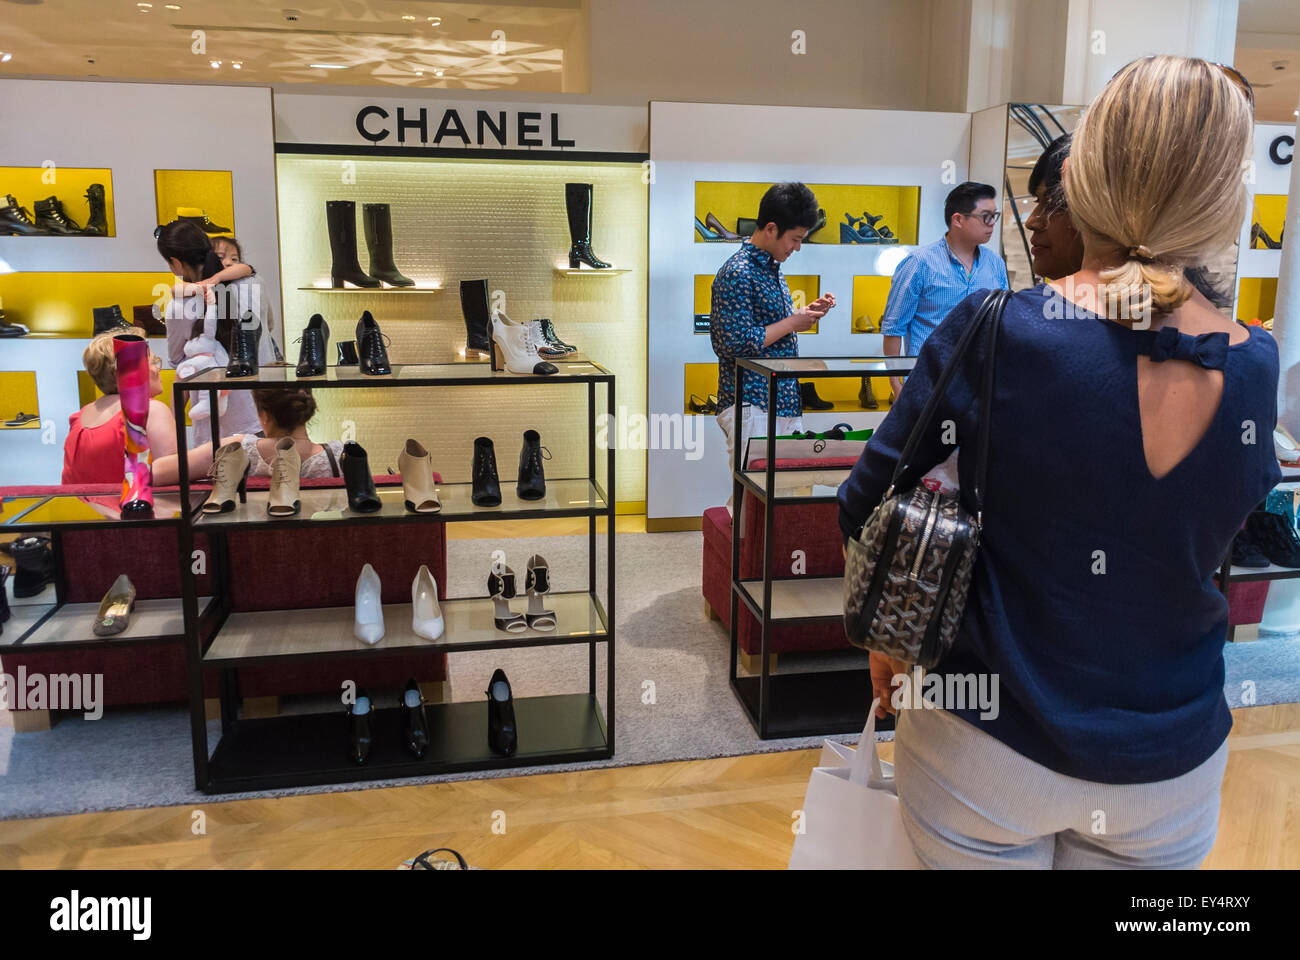 Paris, France, Luxury Fashion Designer Brands , Chanel, Women's Accessories  designer SHoes, Shopping in French Department Store, 